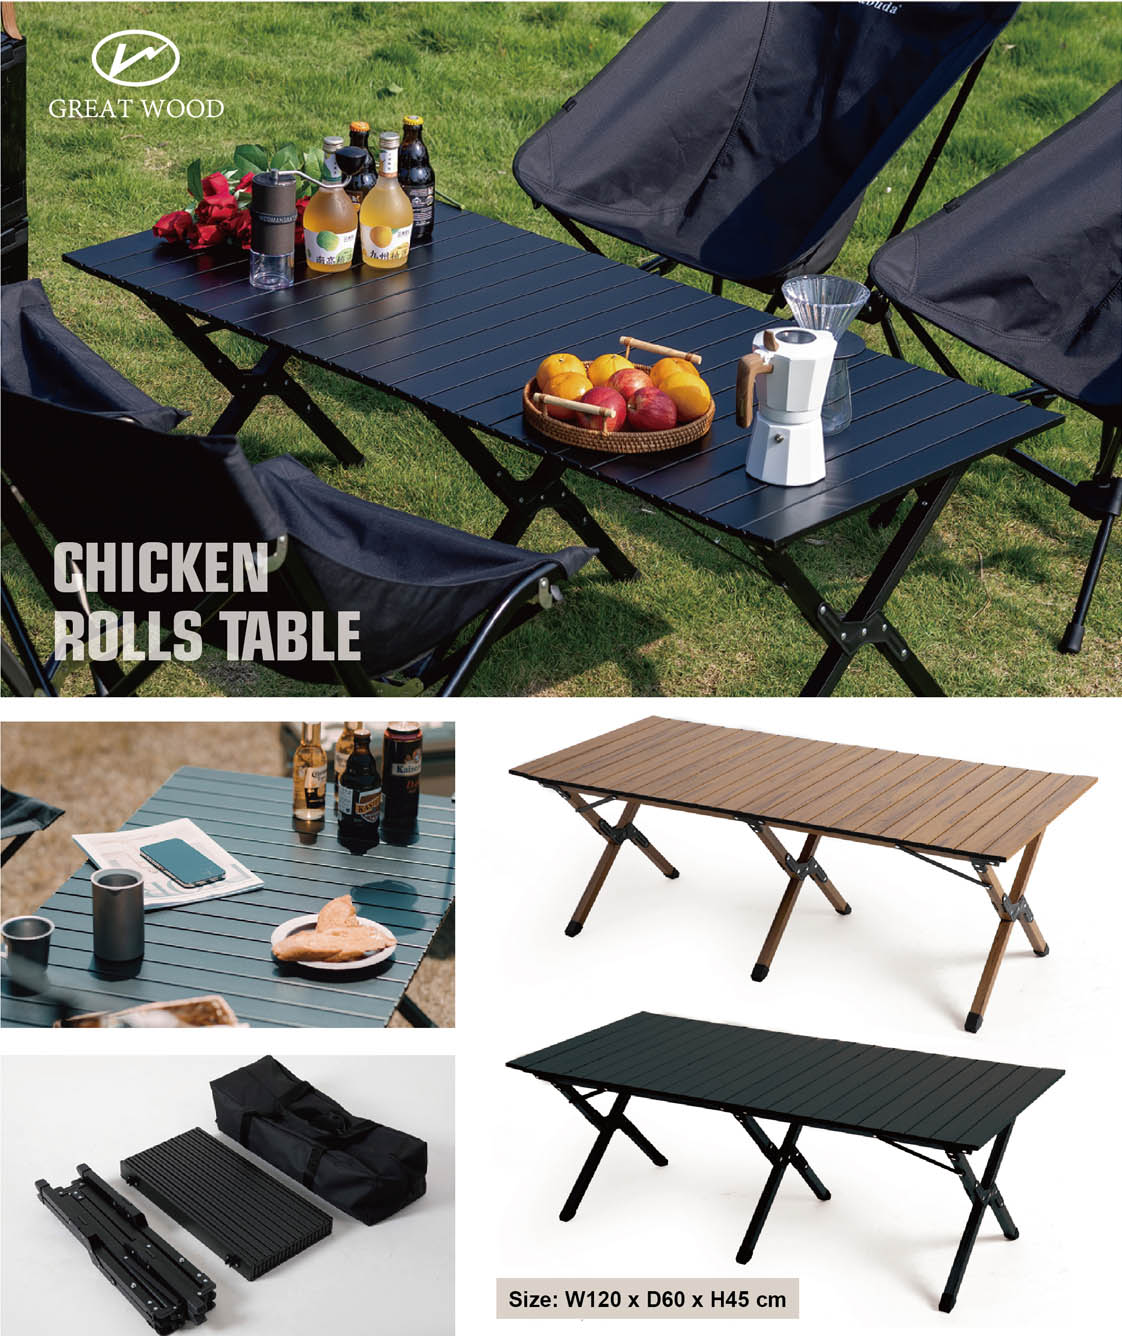 Travel Camping Table for Outdoor/Indoor Picnic GW720021